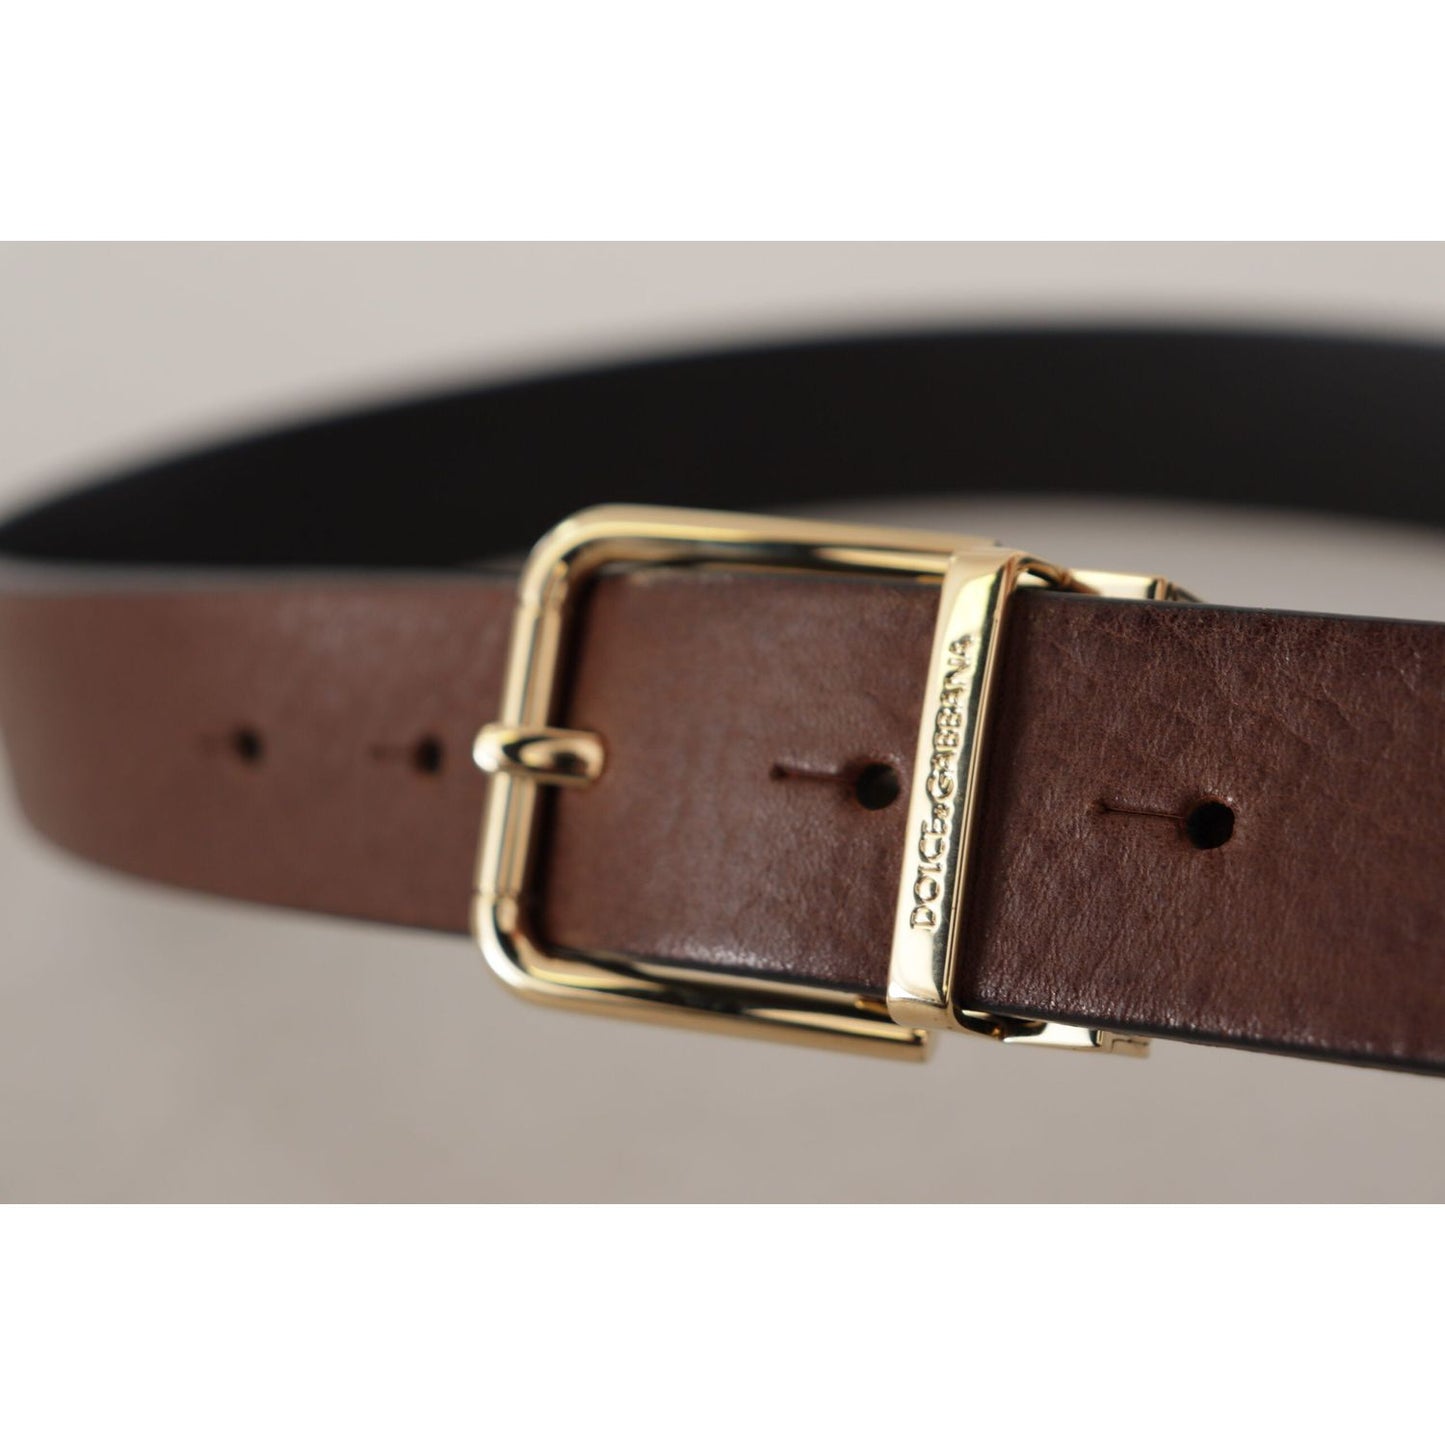 Dolce & Gabbana Elegant Brown Leather Belt with Metal Buckle brown-classic-leather-gold-tone-metal-buckle-belt IMG_7184-scaled-81ab323f-912.jpg